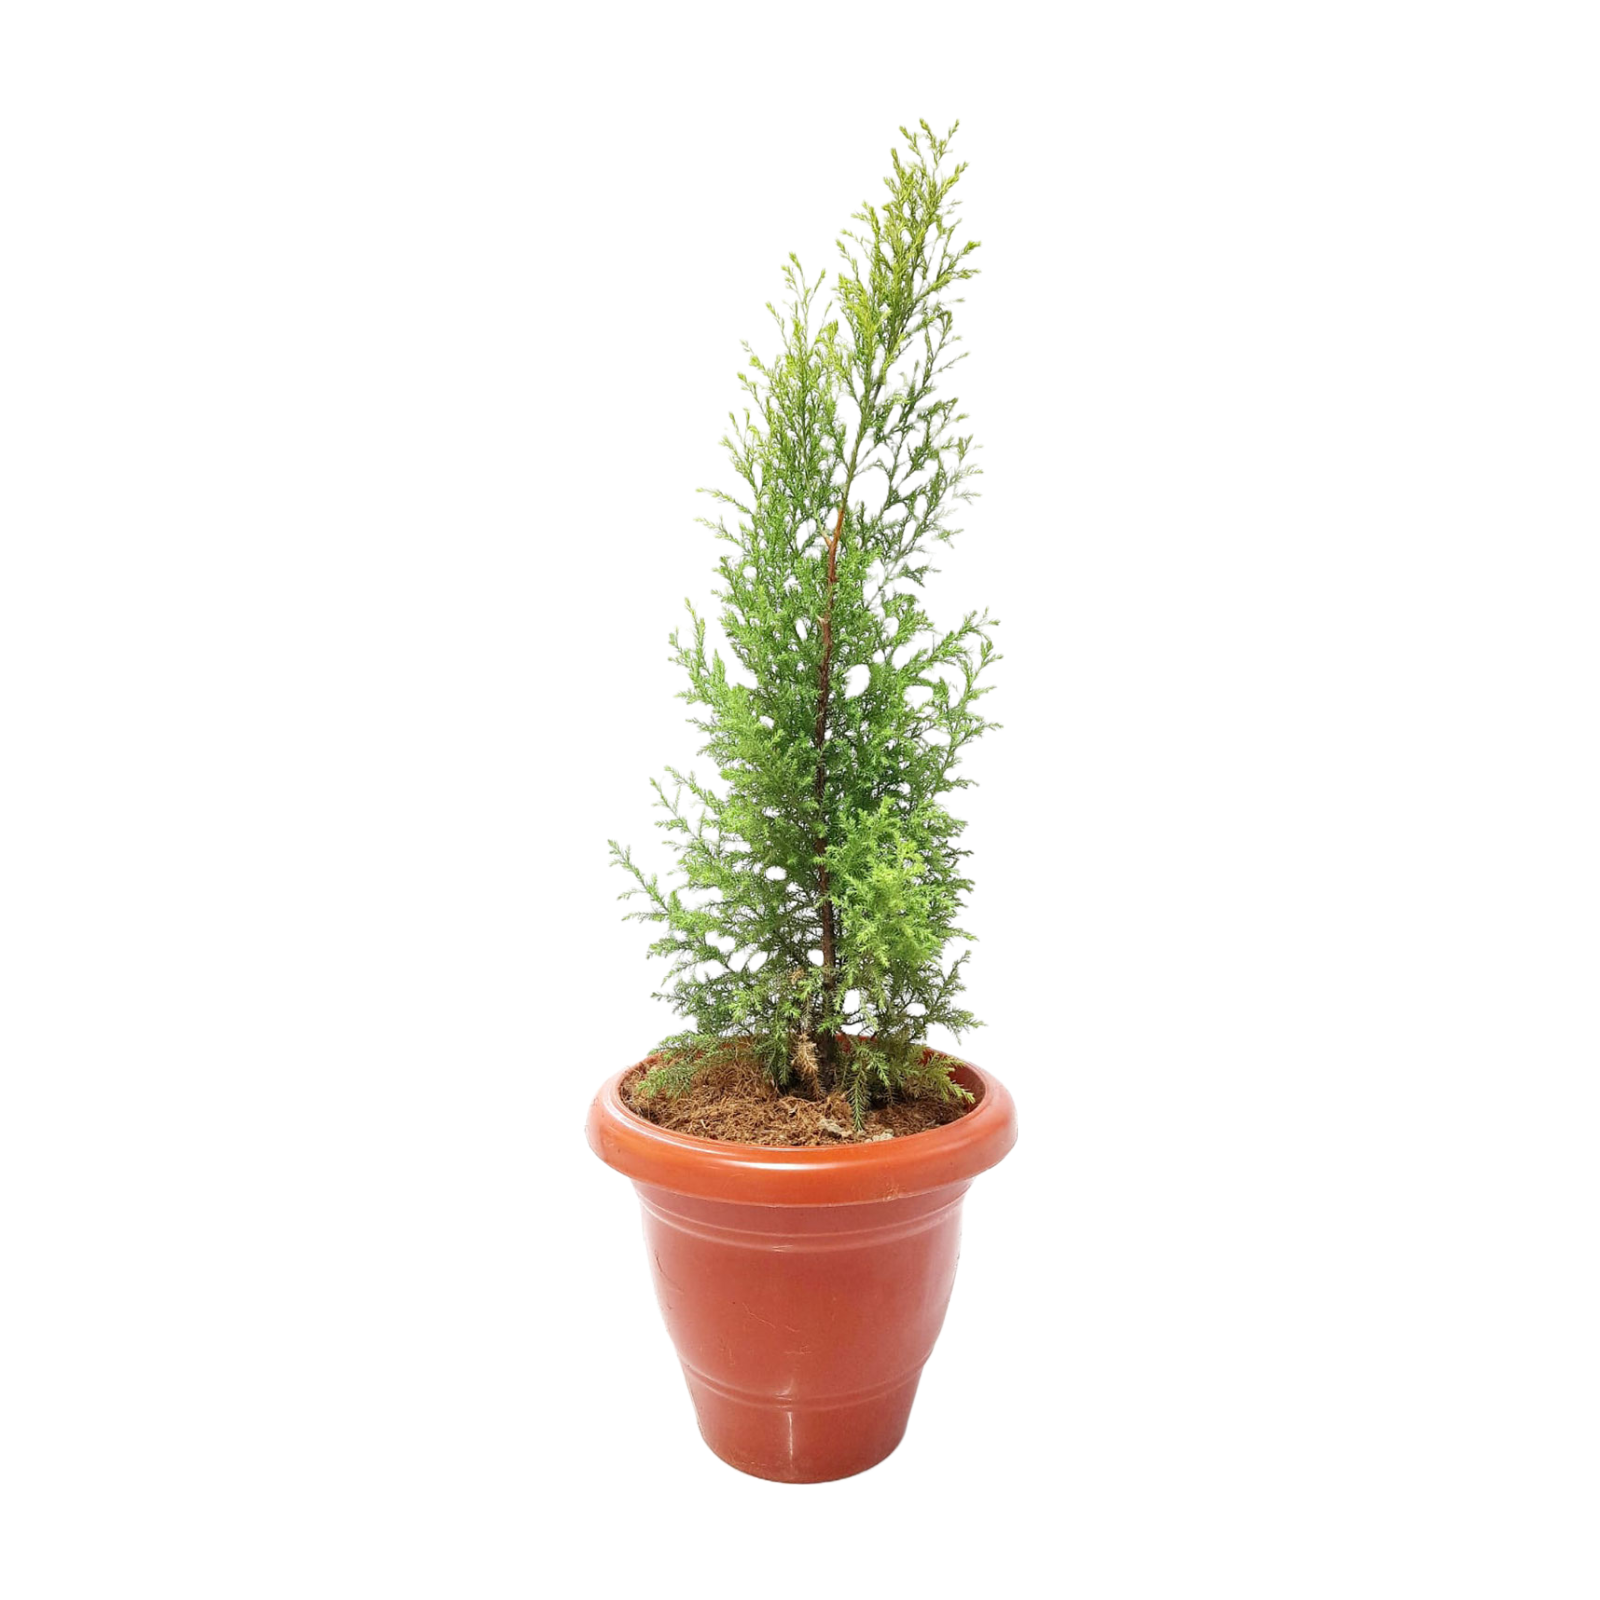 Golden Cypress Plant for Sale Online, Buy Golden Cypress Tree with Vibrant Foliage, Online Shopping for Golden Cypress Sapling, Purchase Golden Cypress for Your Garden